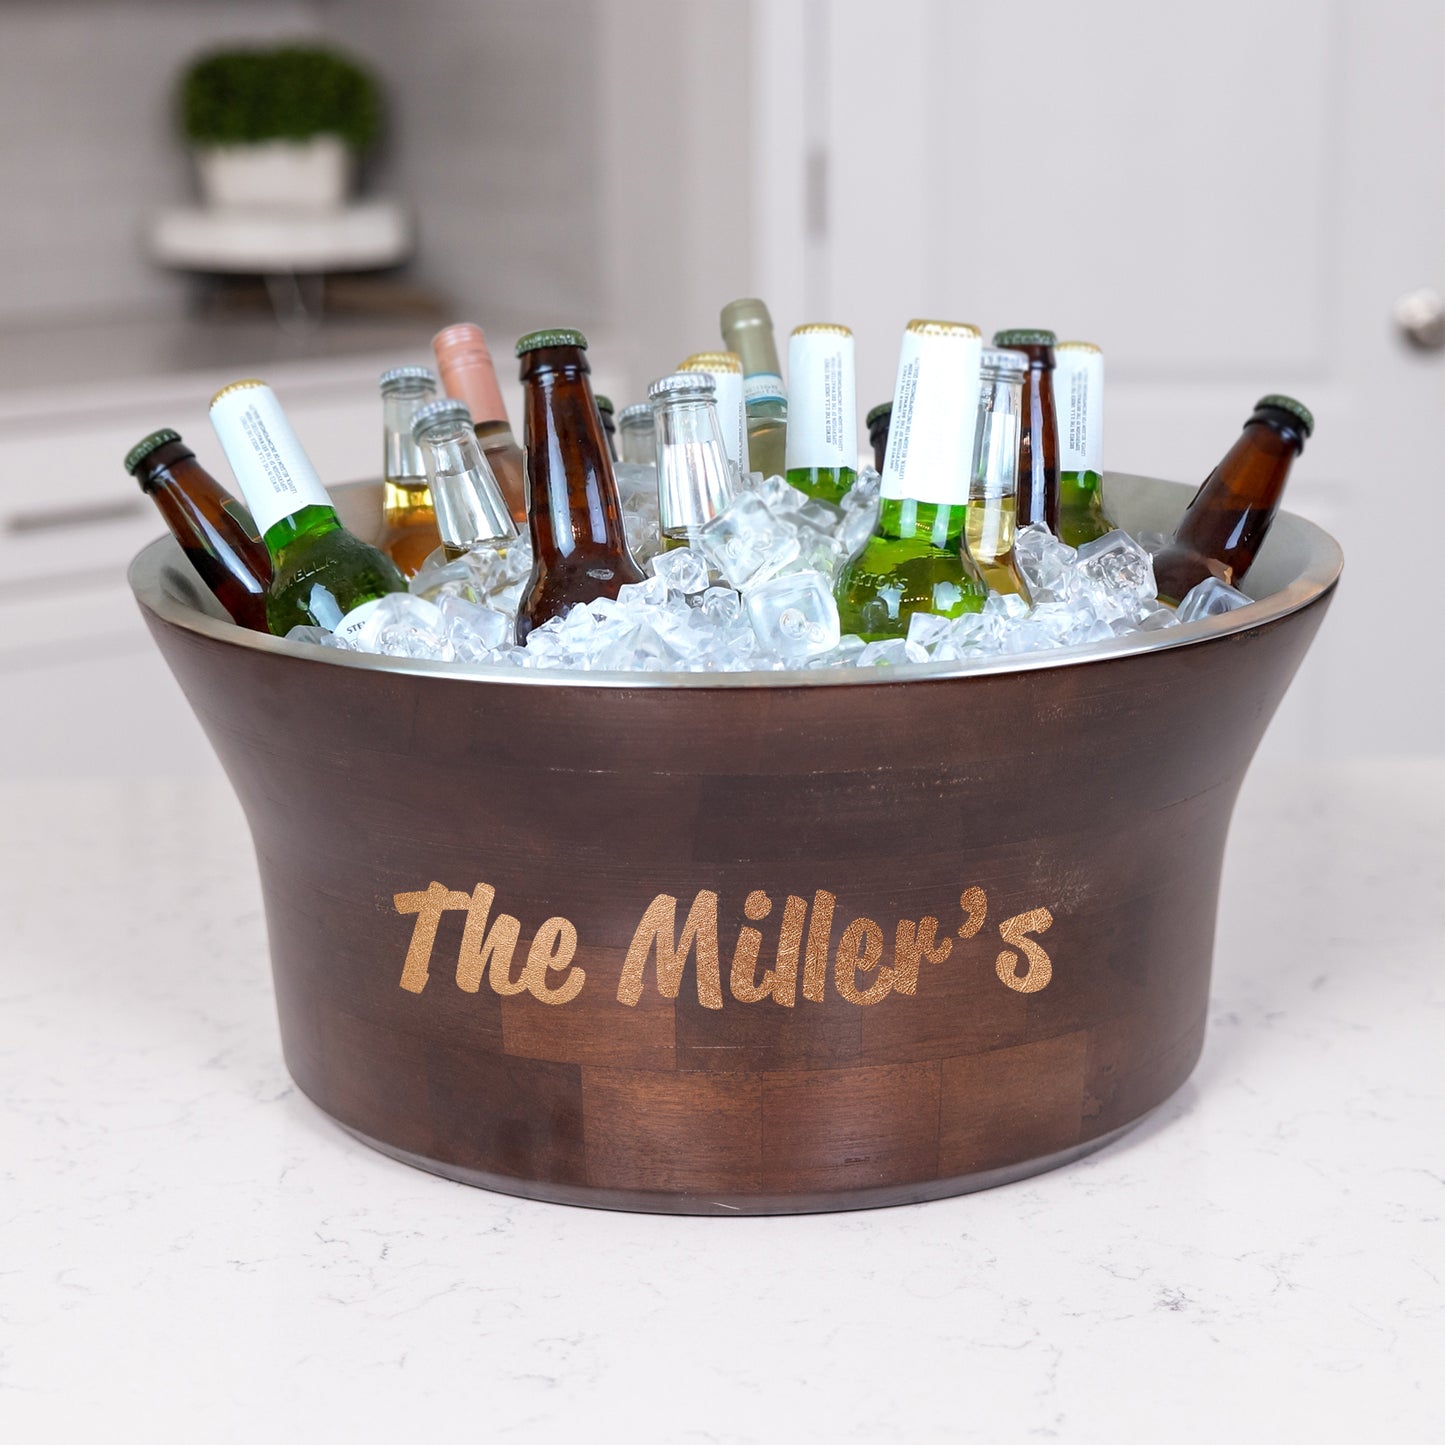 Large party tub insulated , double walled, and personalized.  Holds beer, wine, champagne and other drinks with ice when serving drinks to party guests. Includes a stainless steel interior and a mango wood exterior.  Perfect use for the kitchen, dining room or home bar.  100% leak proof = absolutely no leaking for a mess free party